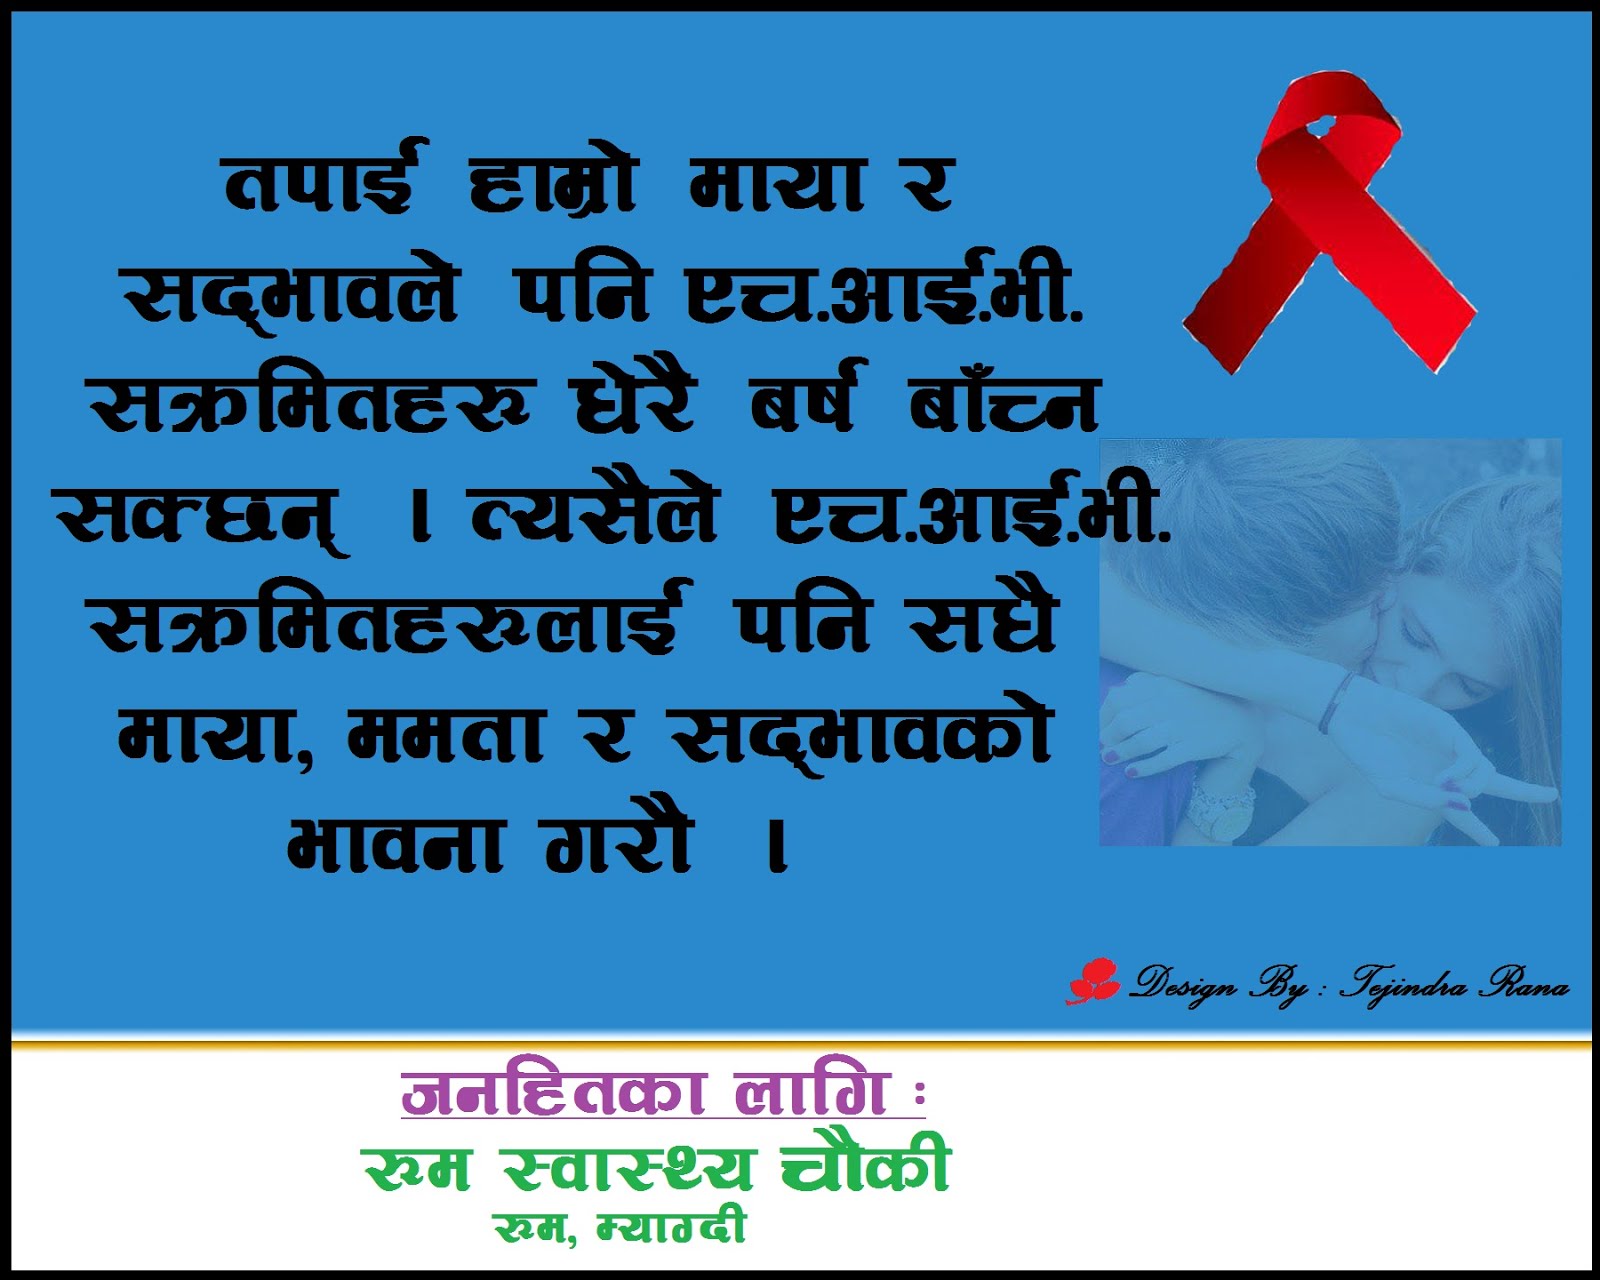 Love for HIV/AIDS